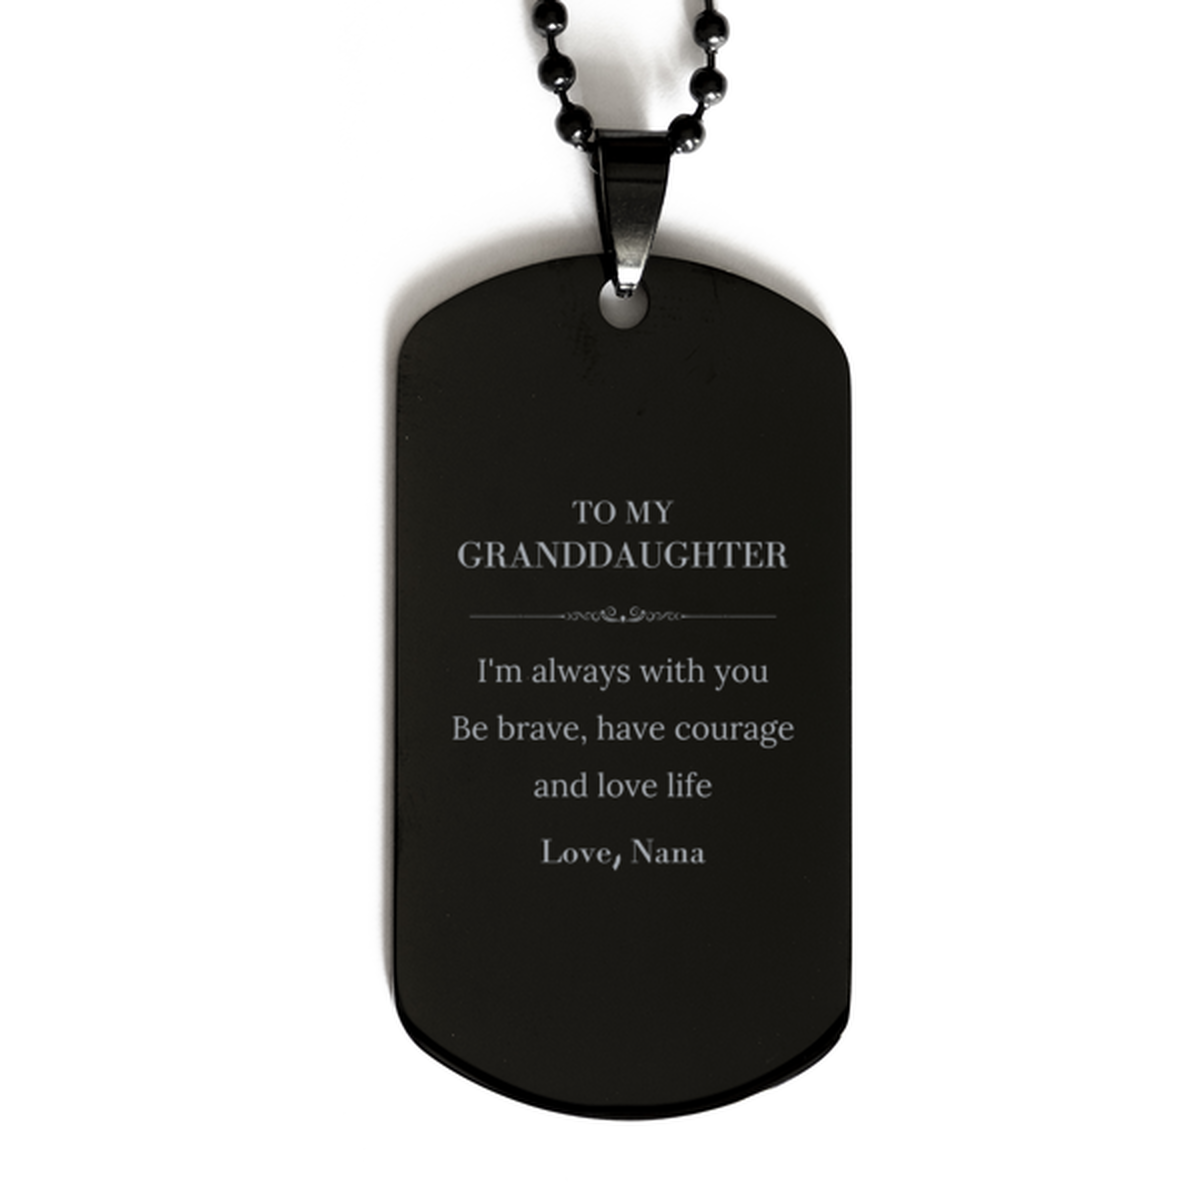 To My Granddaughter Gifts from Nana, Unique Black Dog Tag Inspirational Christmas Birthday Graduation Gifts for Granddaughter I'm always with you. Be brave, have courage and love life. Love, Nana